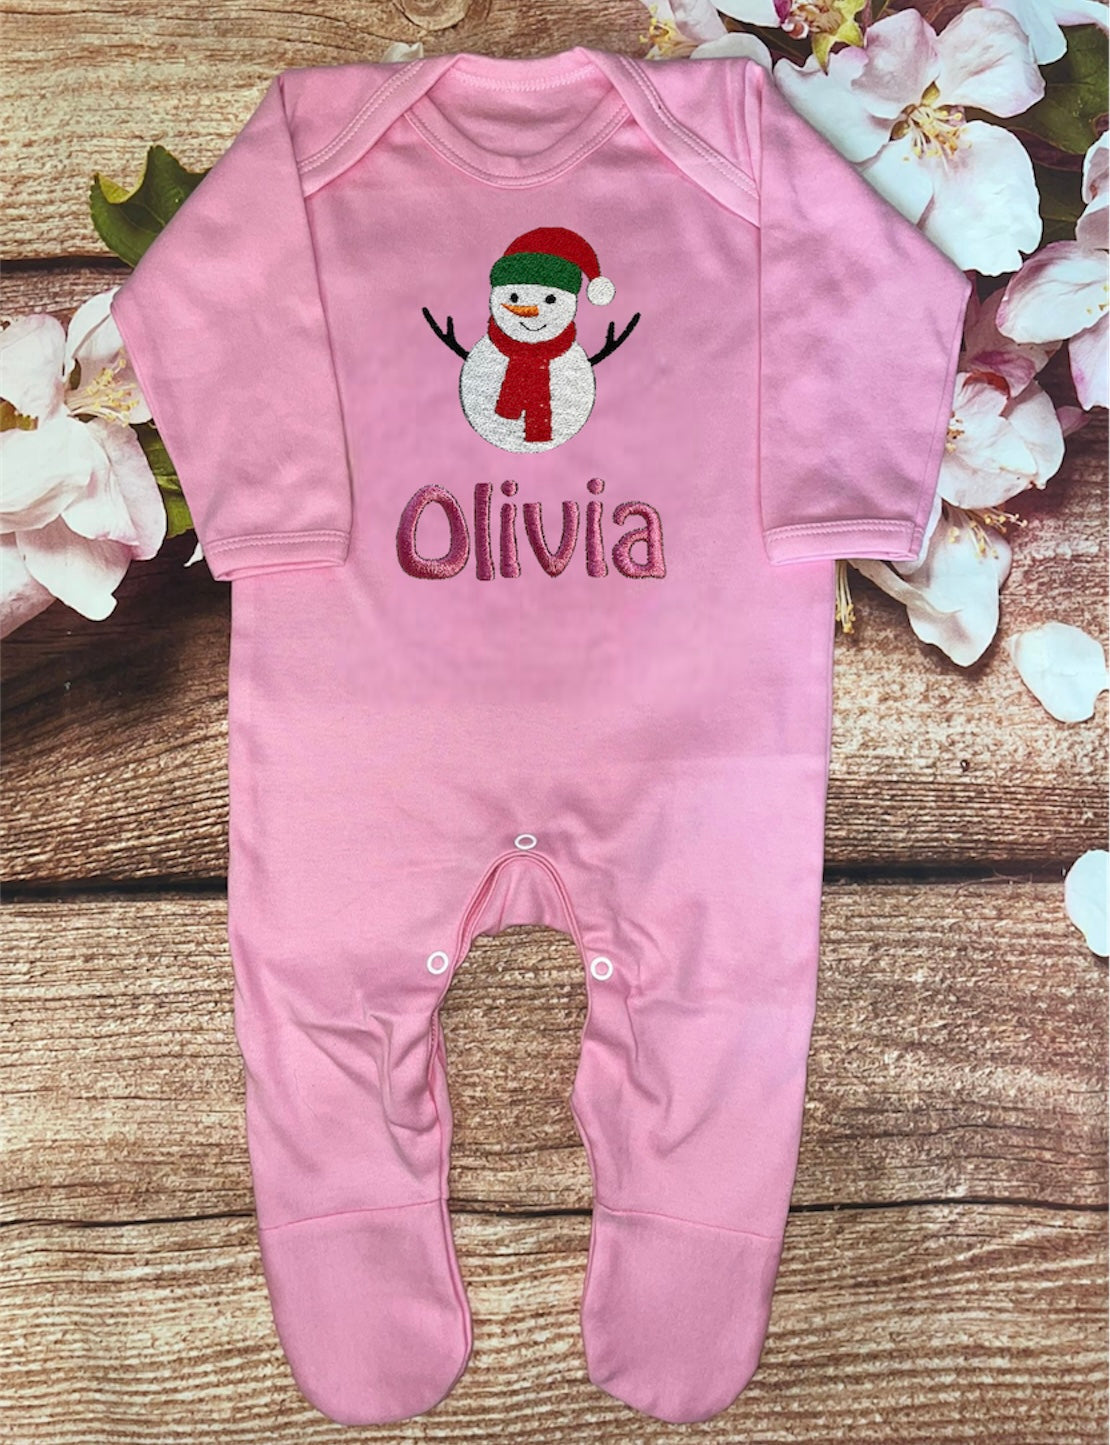 Christmas onesie / sleepsuit embroidered & personalised with name. Choice of designs. Gift, keepsake